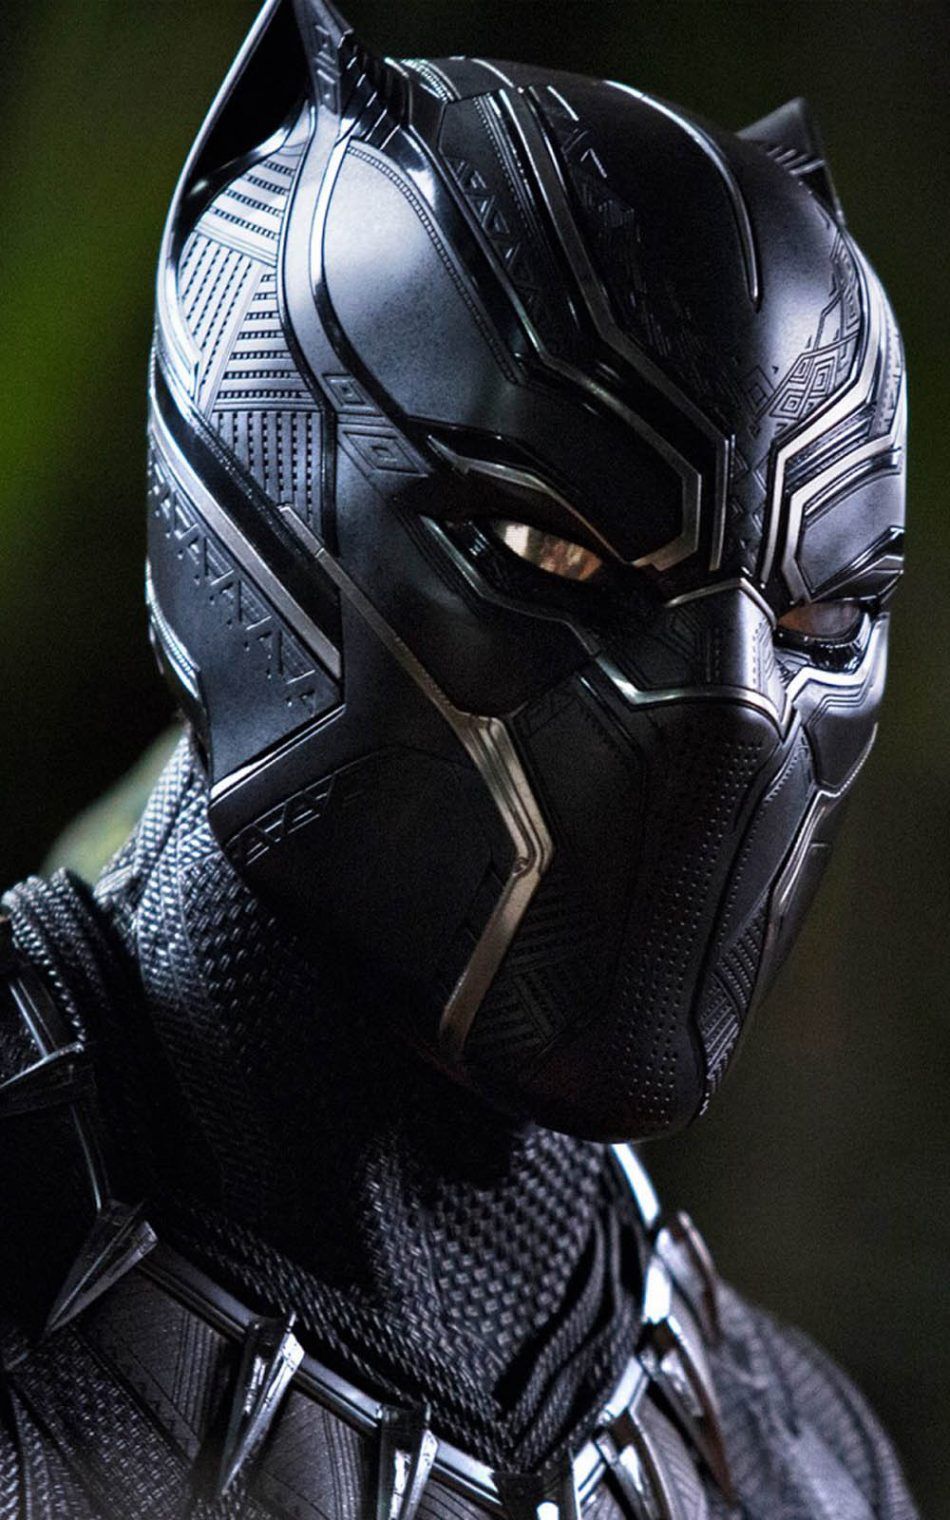 Black Panther 4k Mobile Wallpapers - Wallpaper Cave